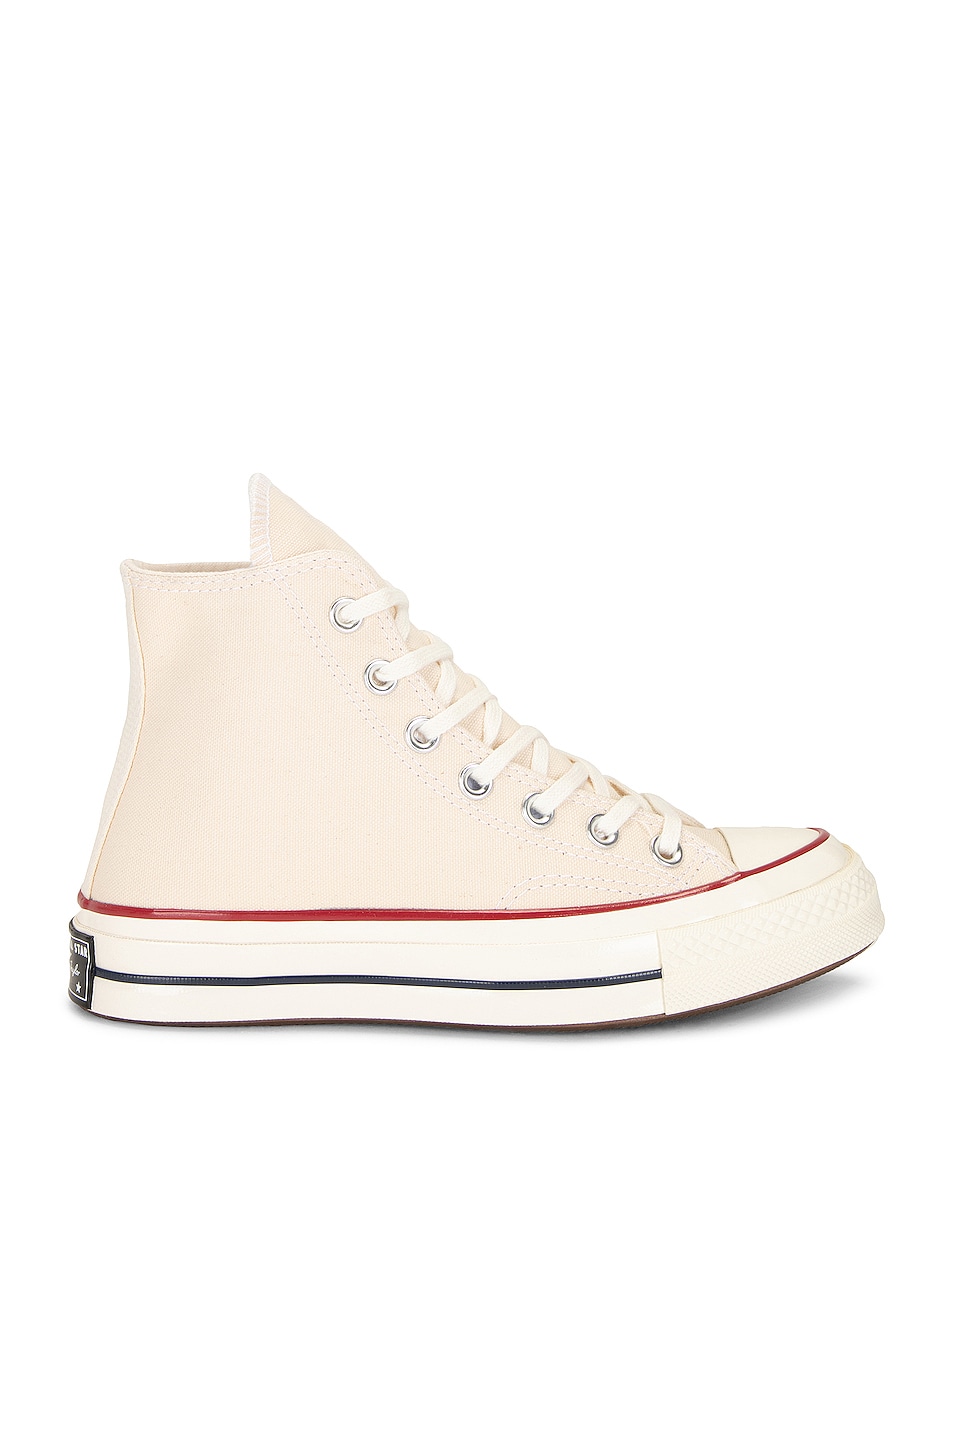 Image 1 of Converse Chuck 70 Canvas High Tops in Parchment, Garnet, & Egret